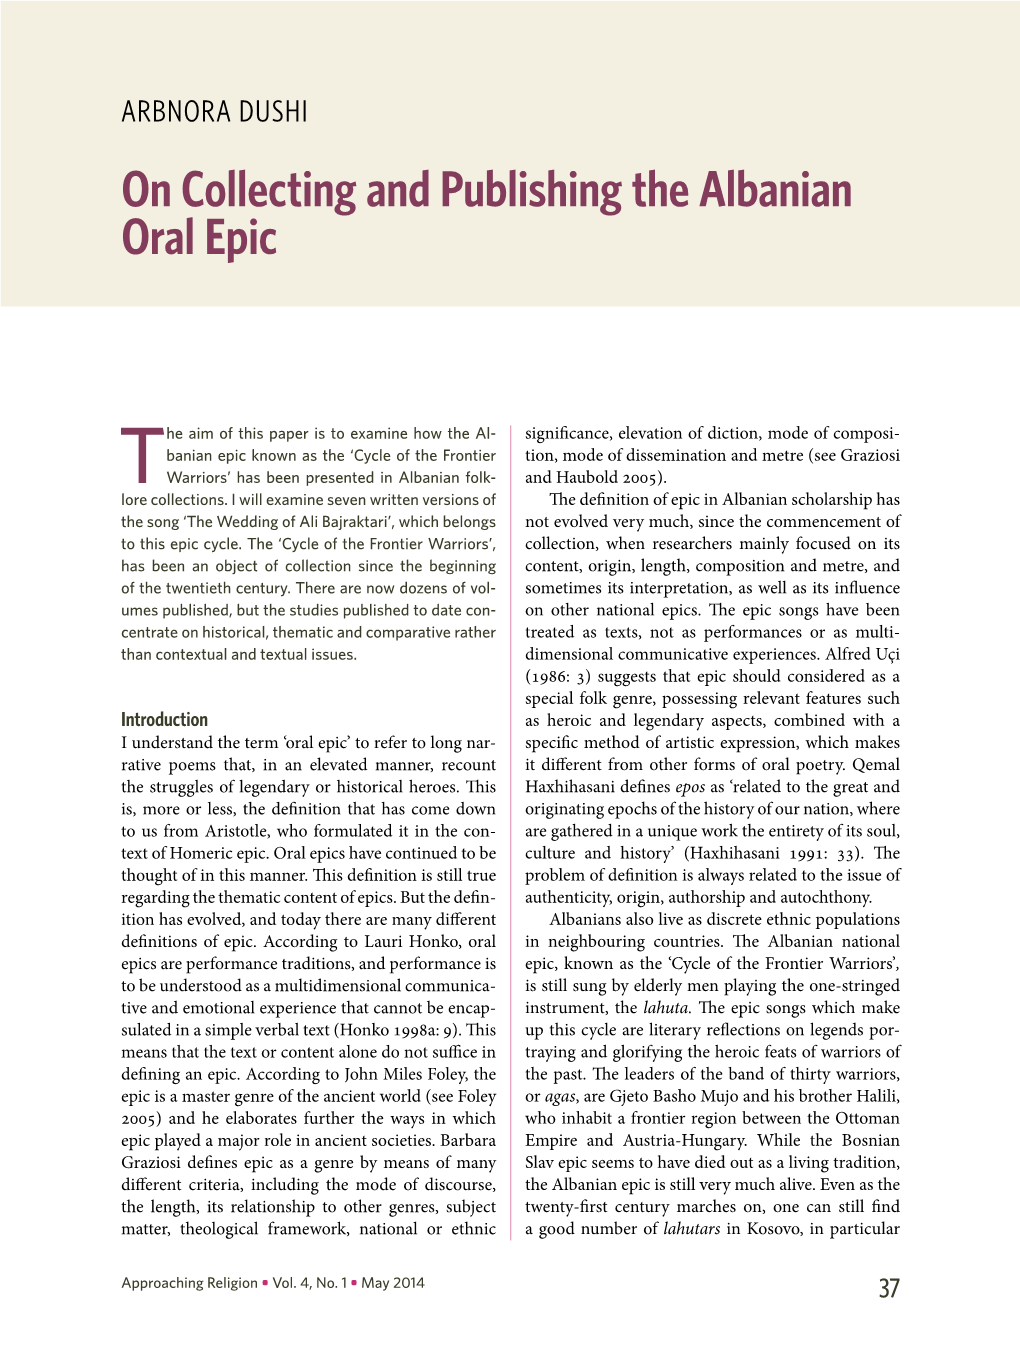 On Collecting and Publishing the Albanian Oral Epic